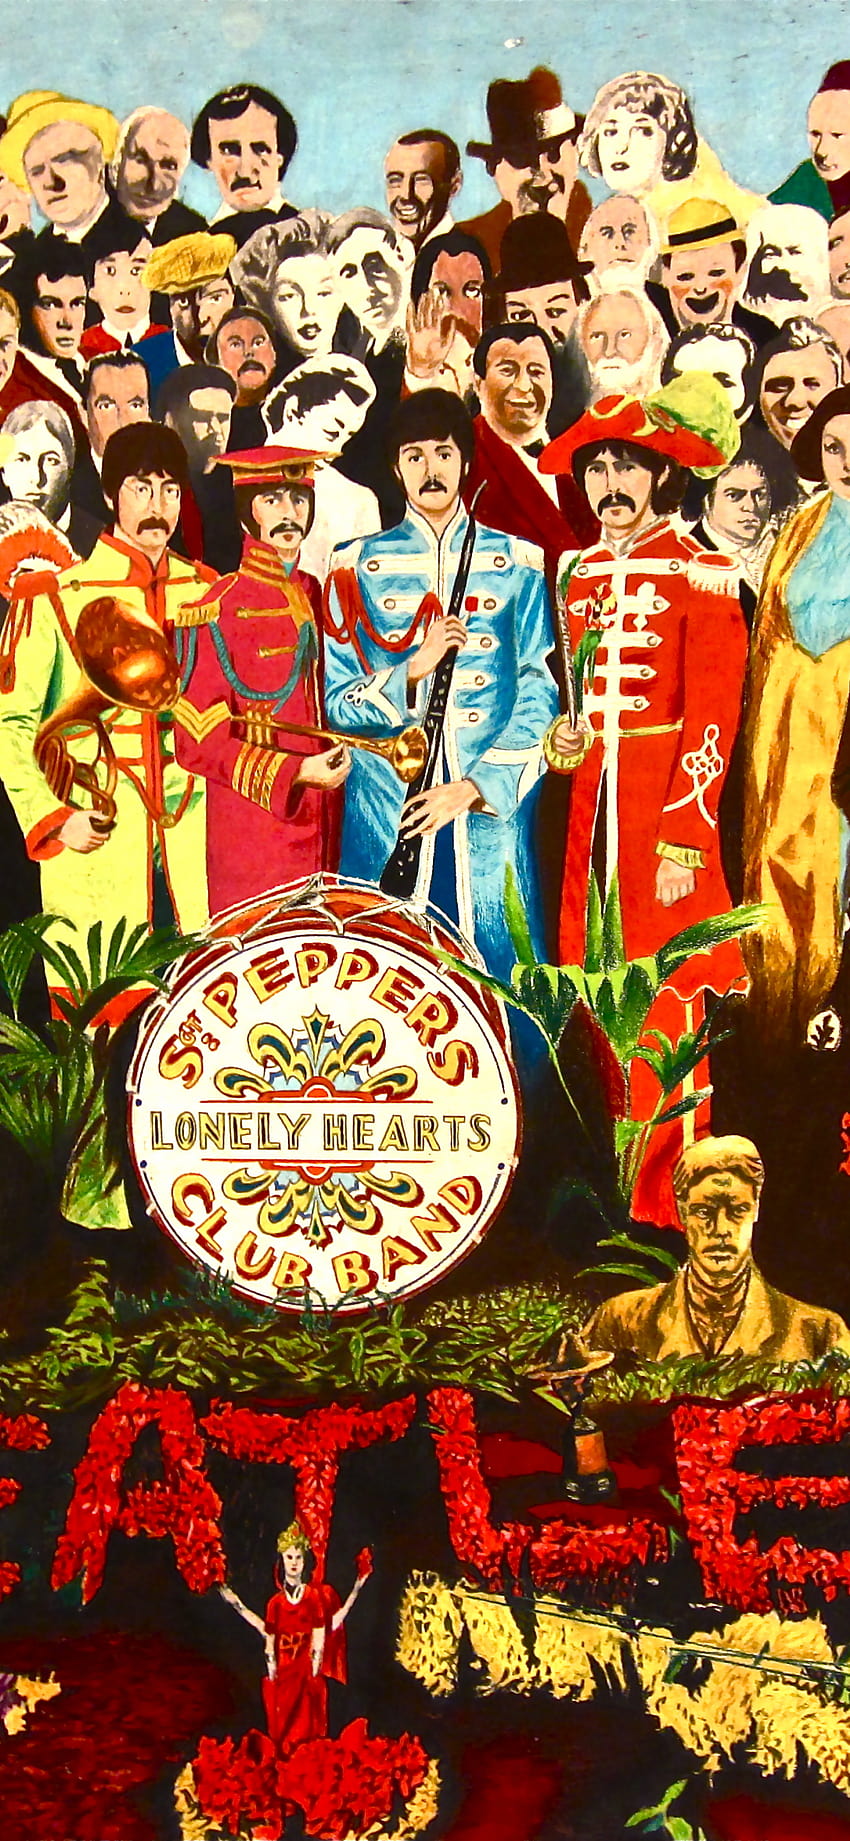 Sgt Peppers Lonely Hearts Club Band Crazy [1125x2436] untuk , Ponsel & Tablet Anda wallpaper ponsel HD